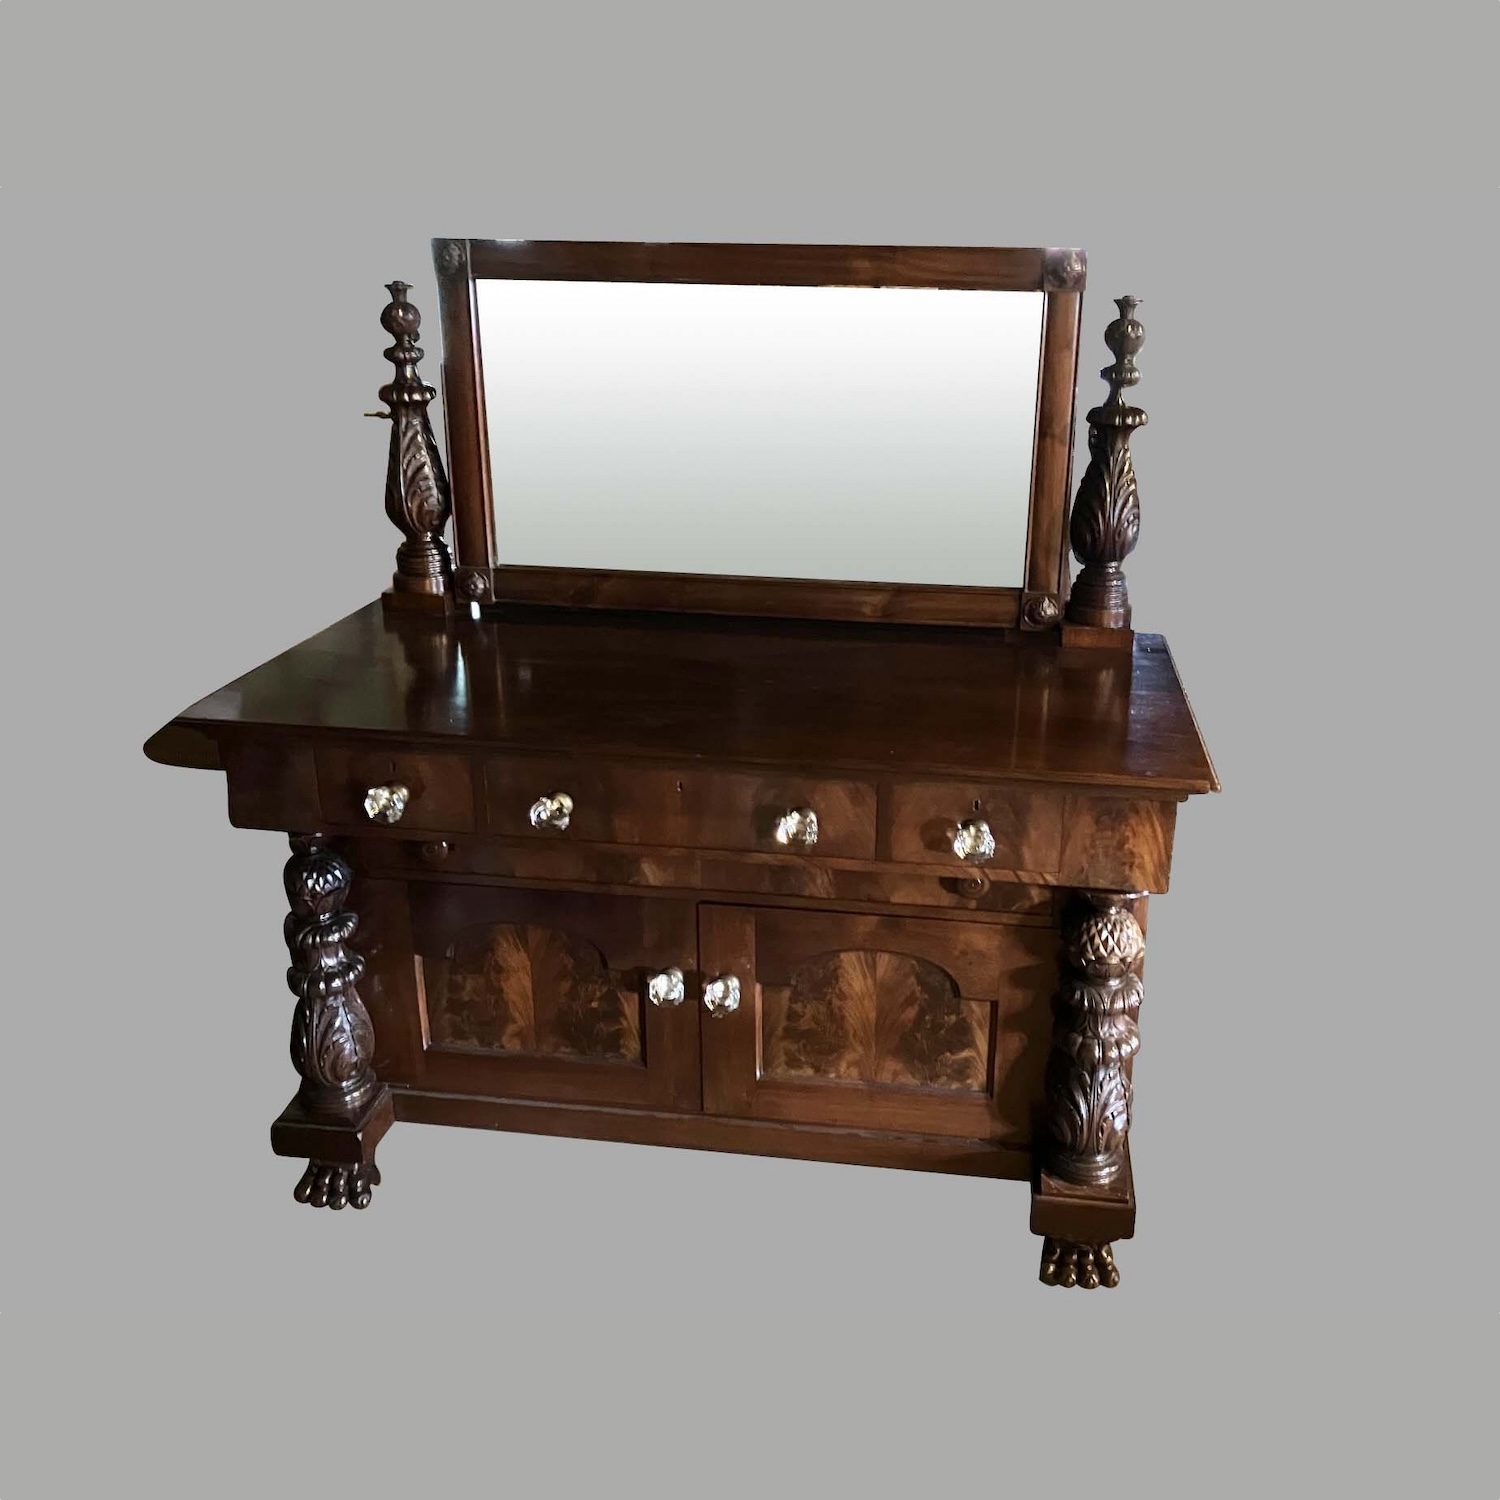 american-empire-revival-mahogany-dressing-chest-with-mirror-c723-34